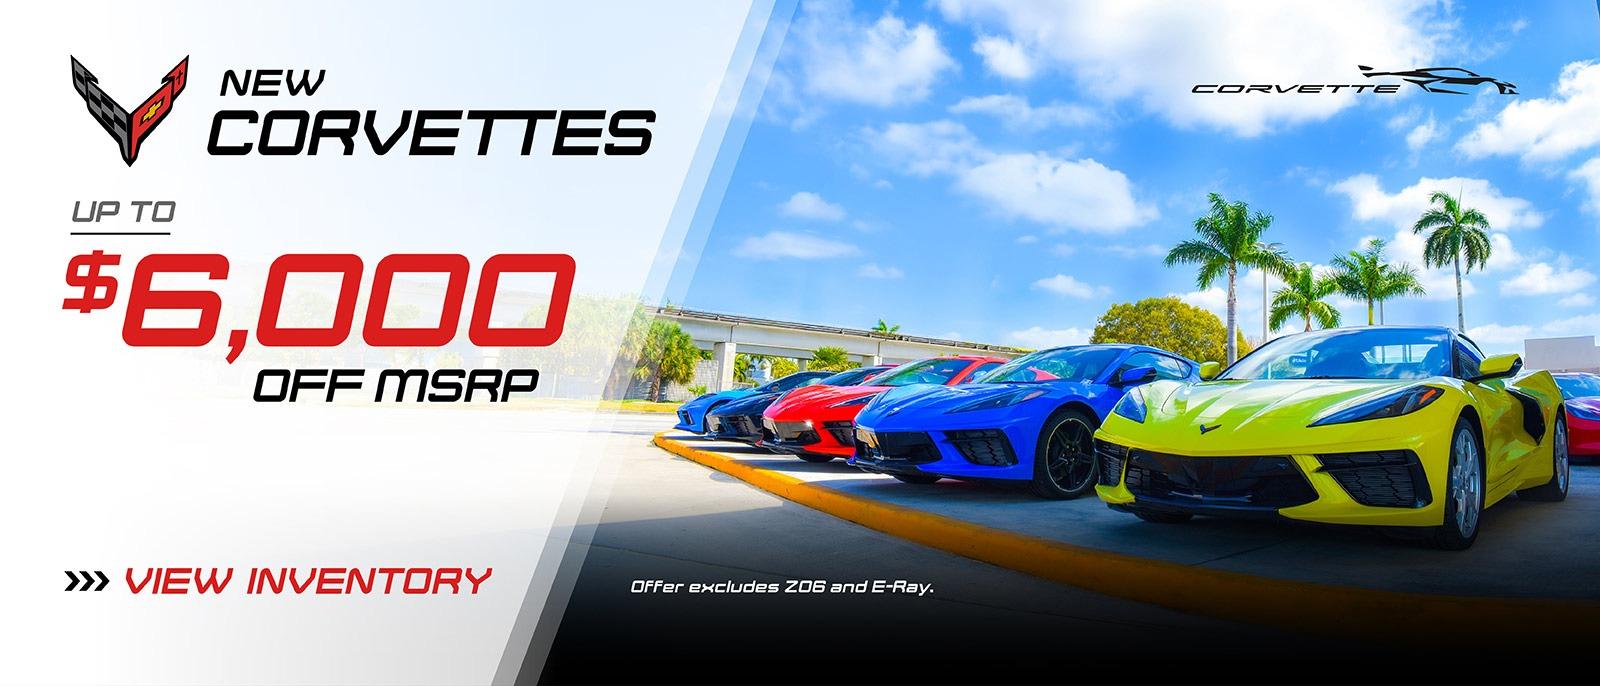 New Corvettes Up to $6000 off MSRP offer excludes Z06 and E-Ray